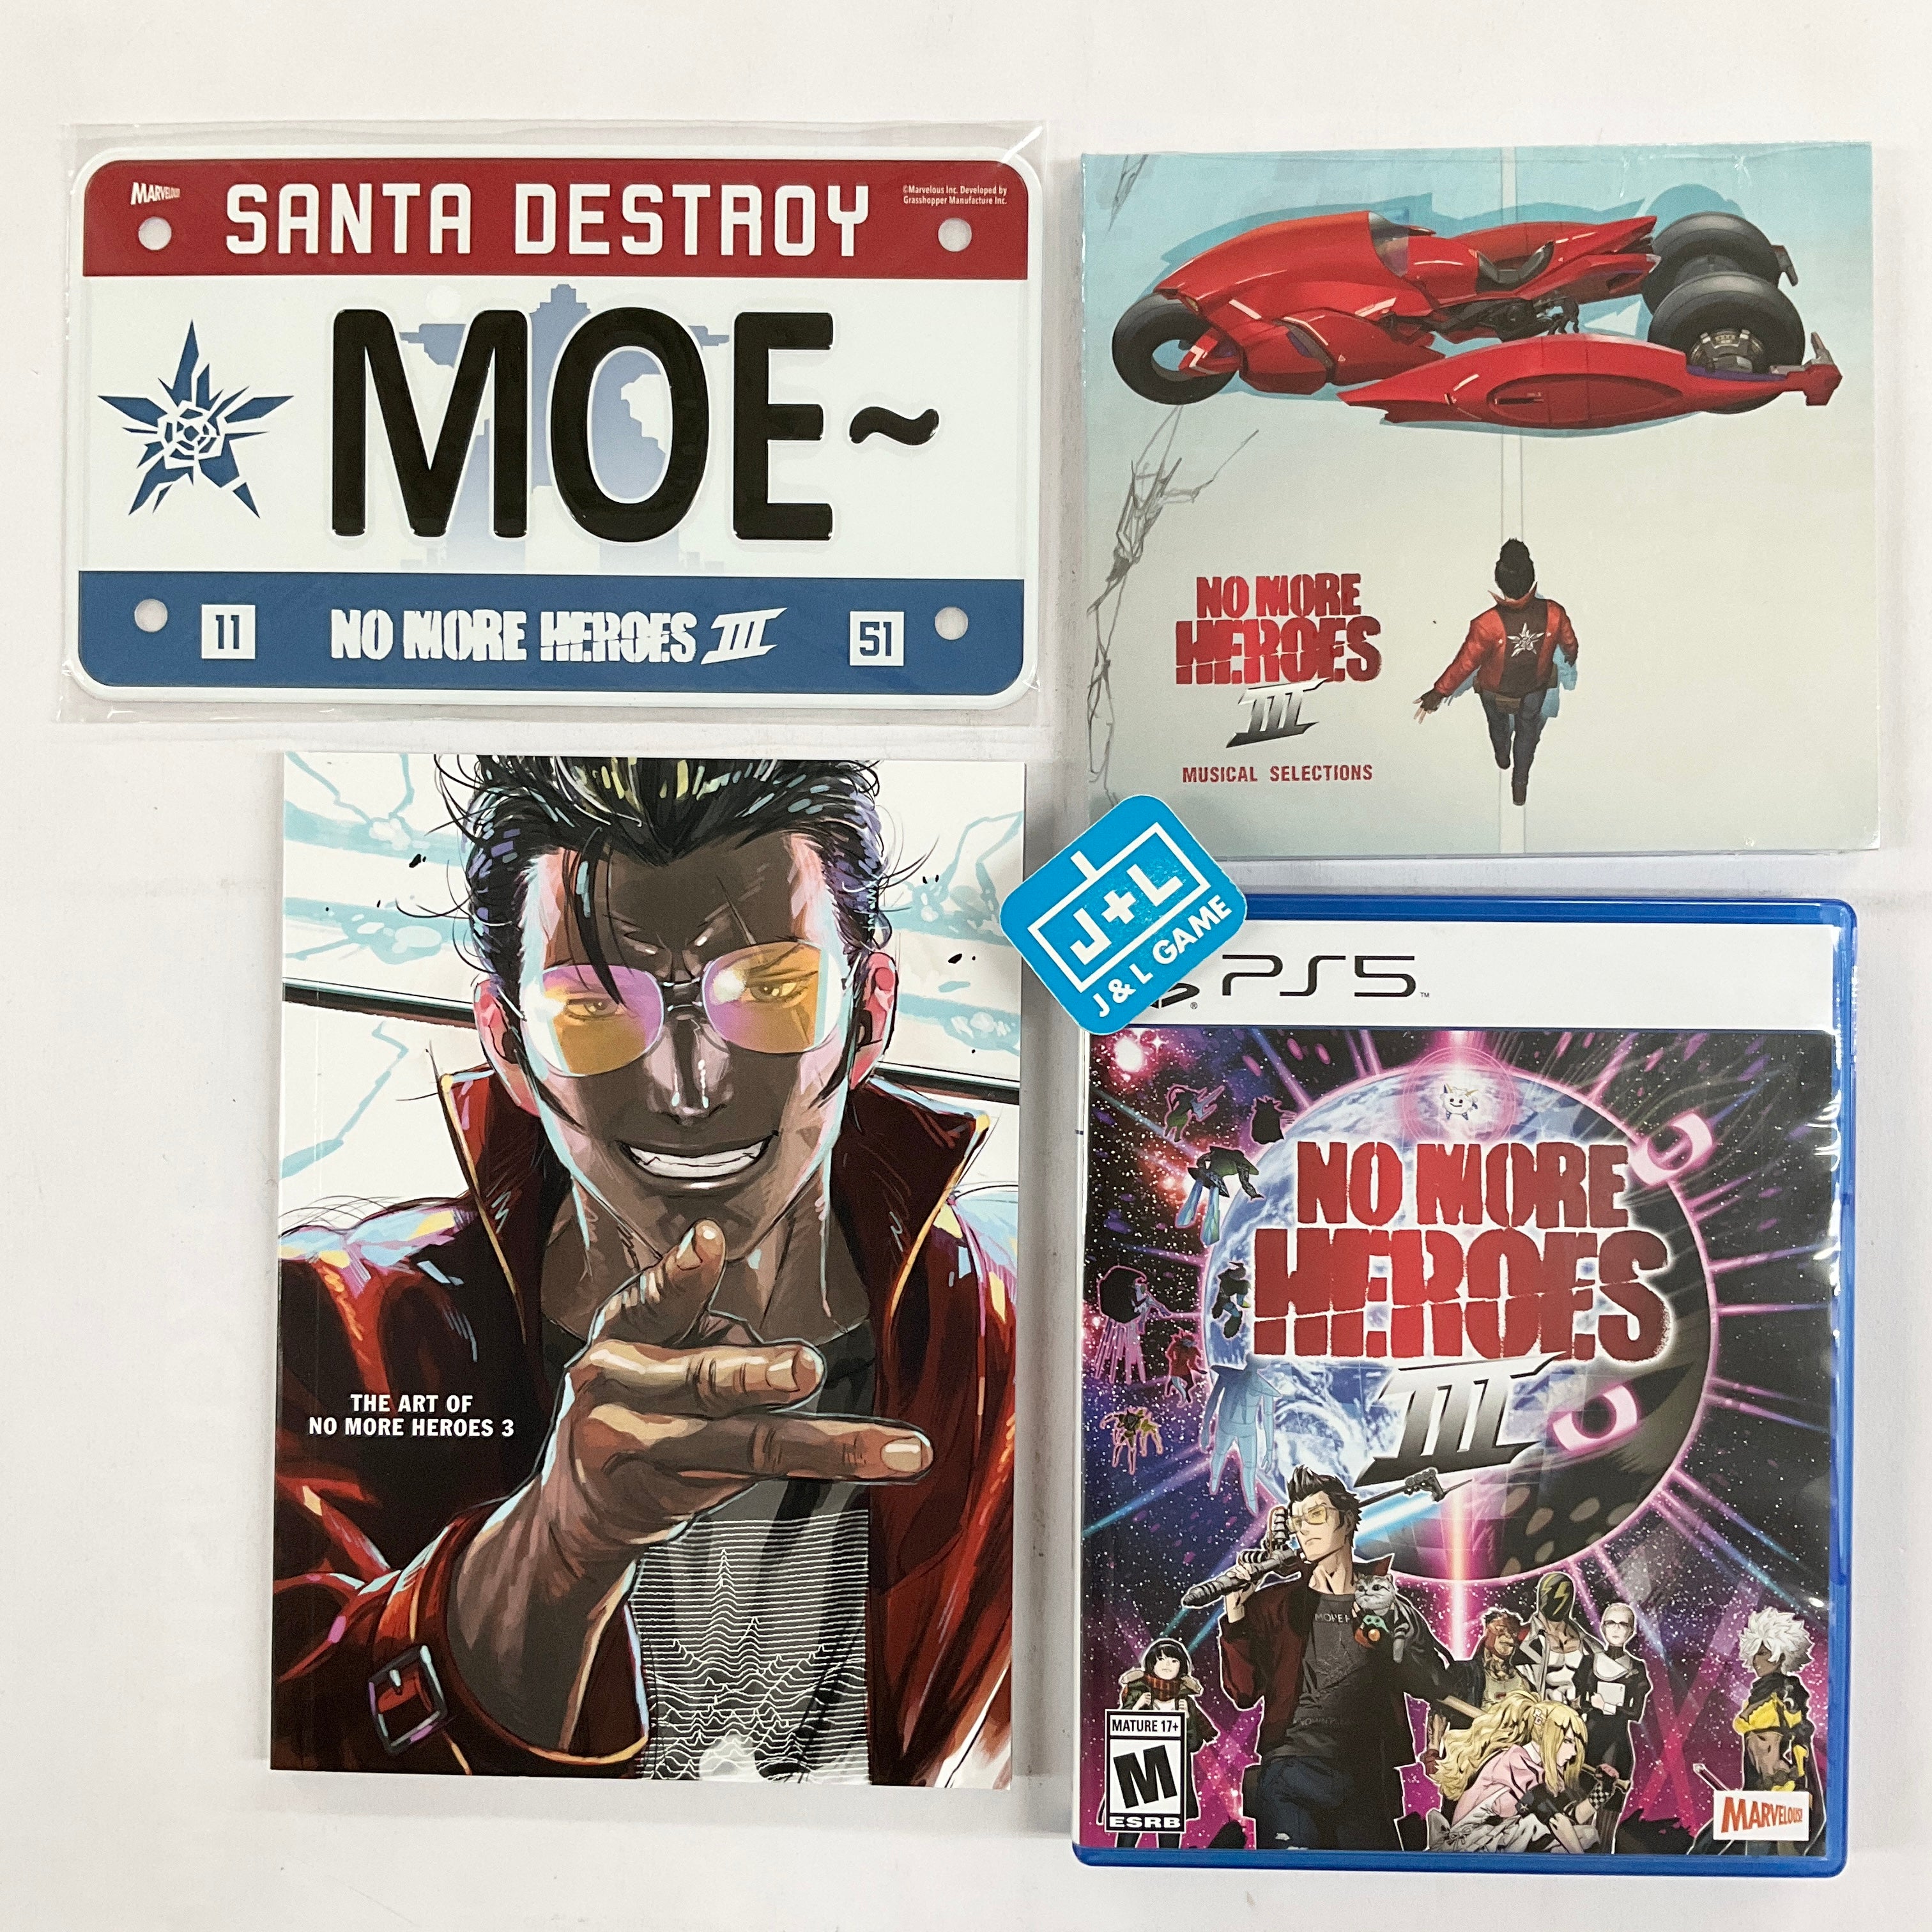 No More Heroes 3 – Day 1 Edition - (PS5) PlayStation 5 [UNBOXING] Video Games Xseed   